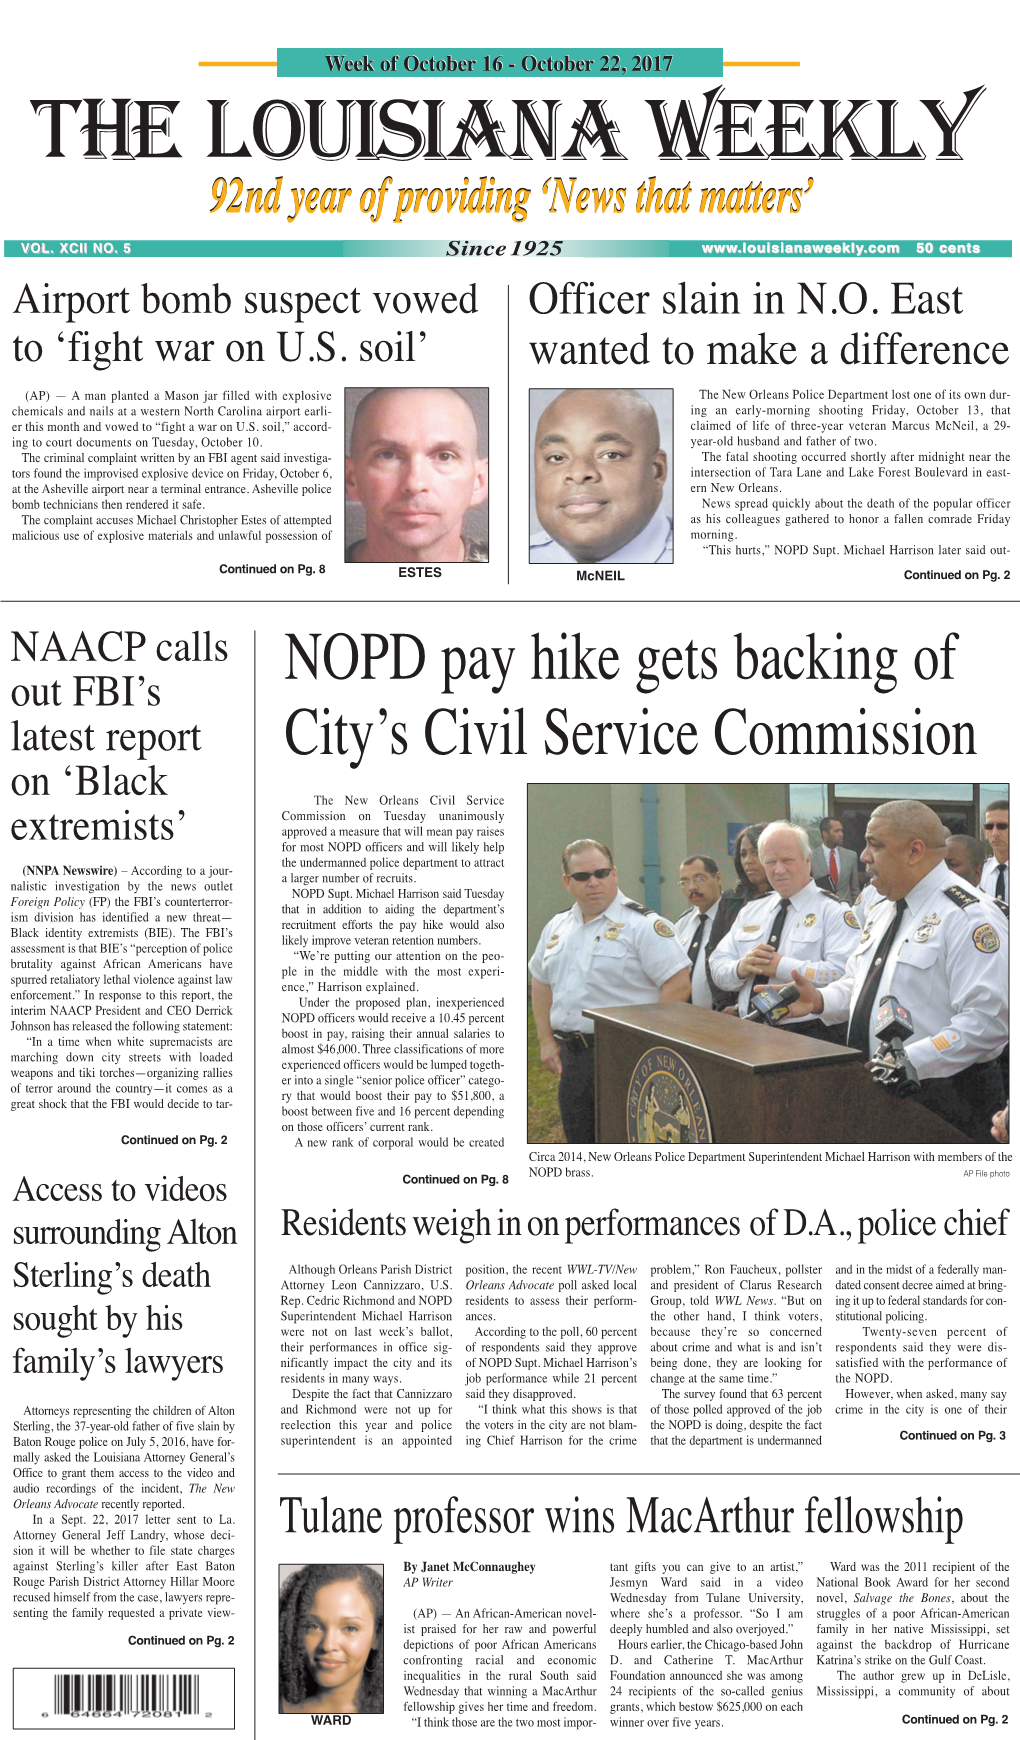 NOPD Pay Hike Gets Backing of City's Civil Service Commission